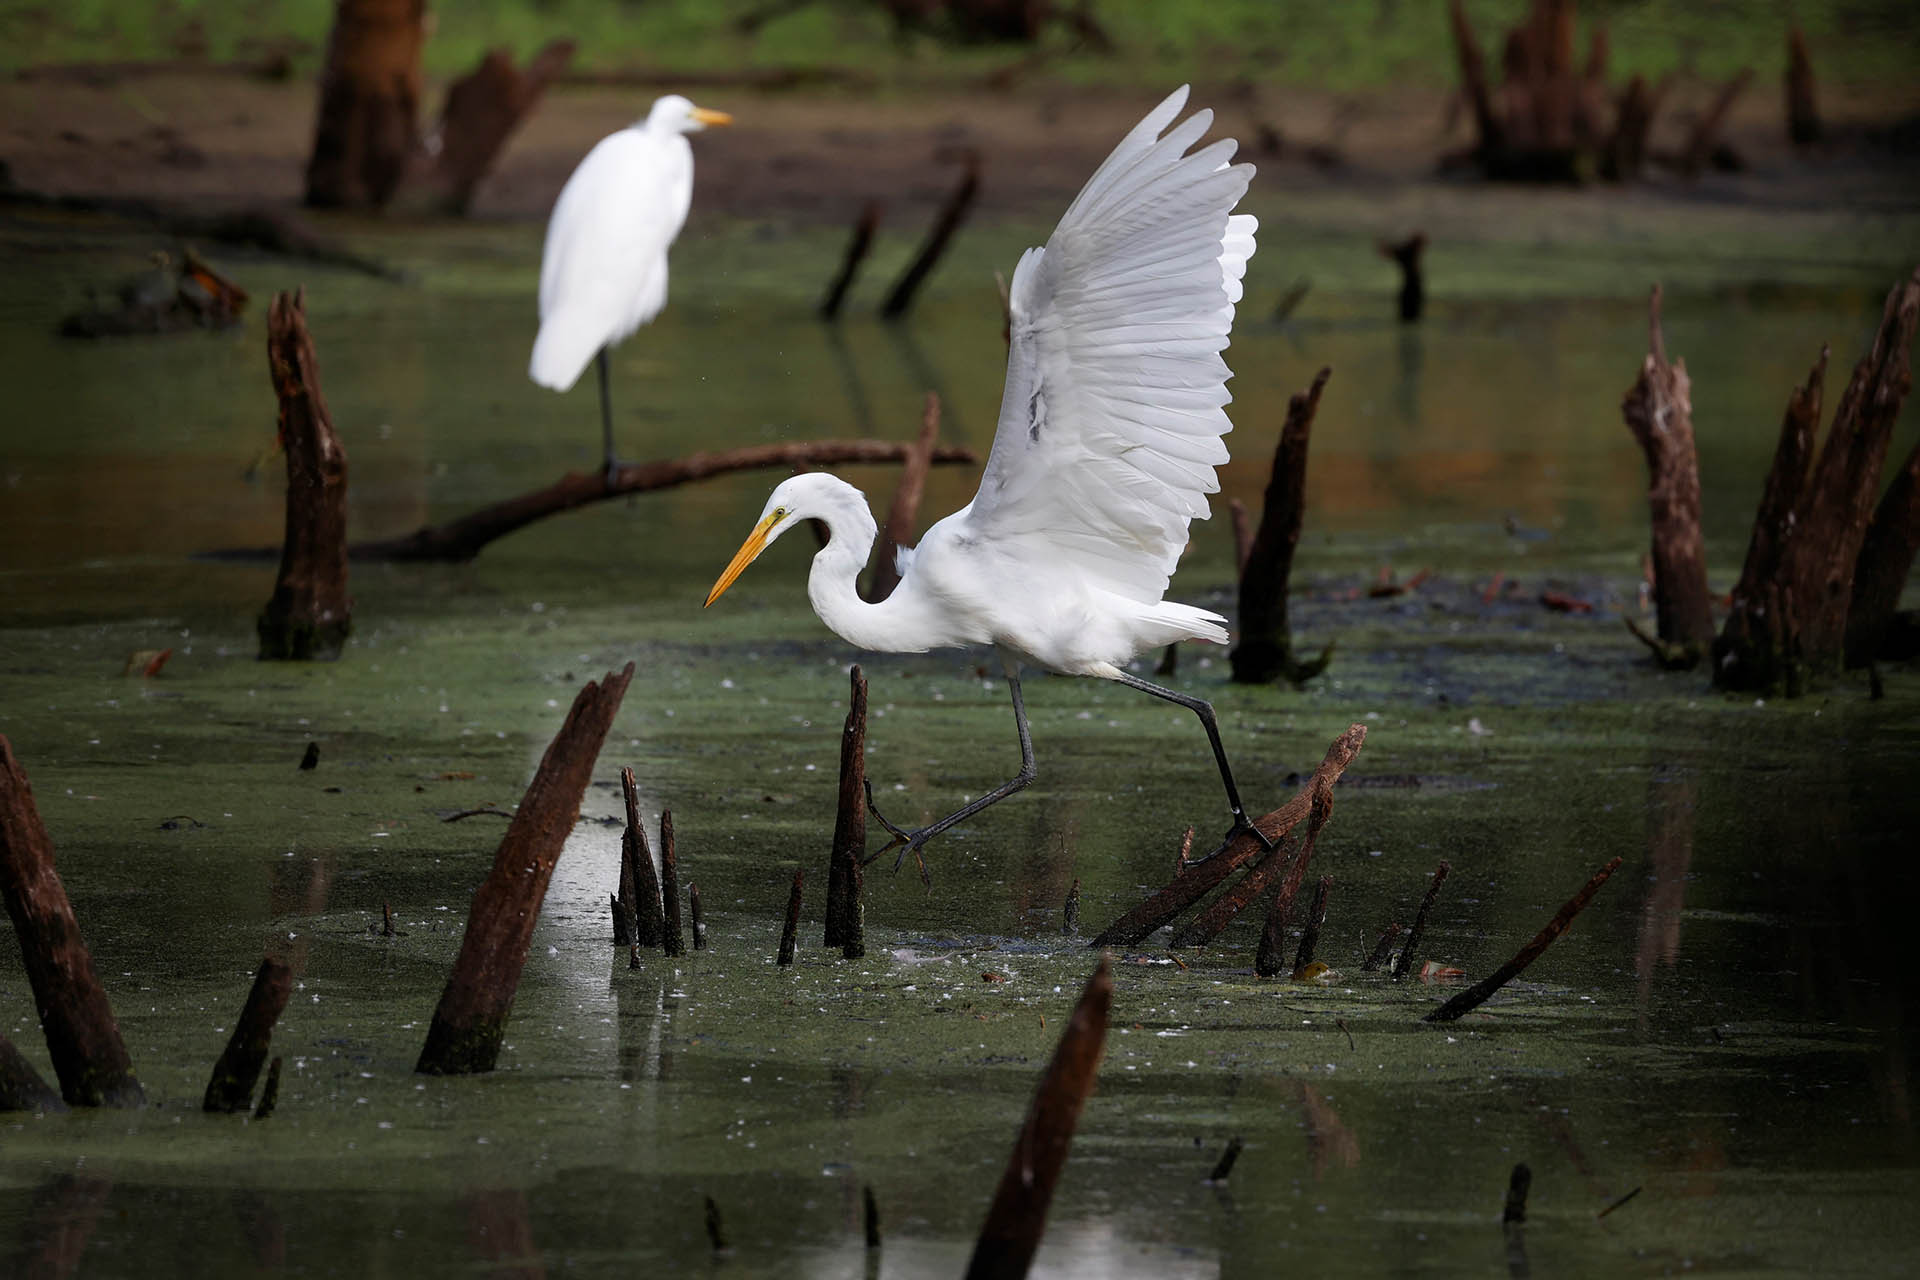 A Great Egret balancing on a log jetting out of marshy waters, its wings in the air. One foot slips off another log.